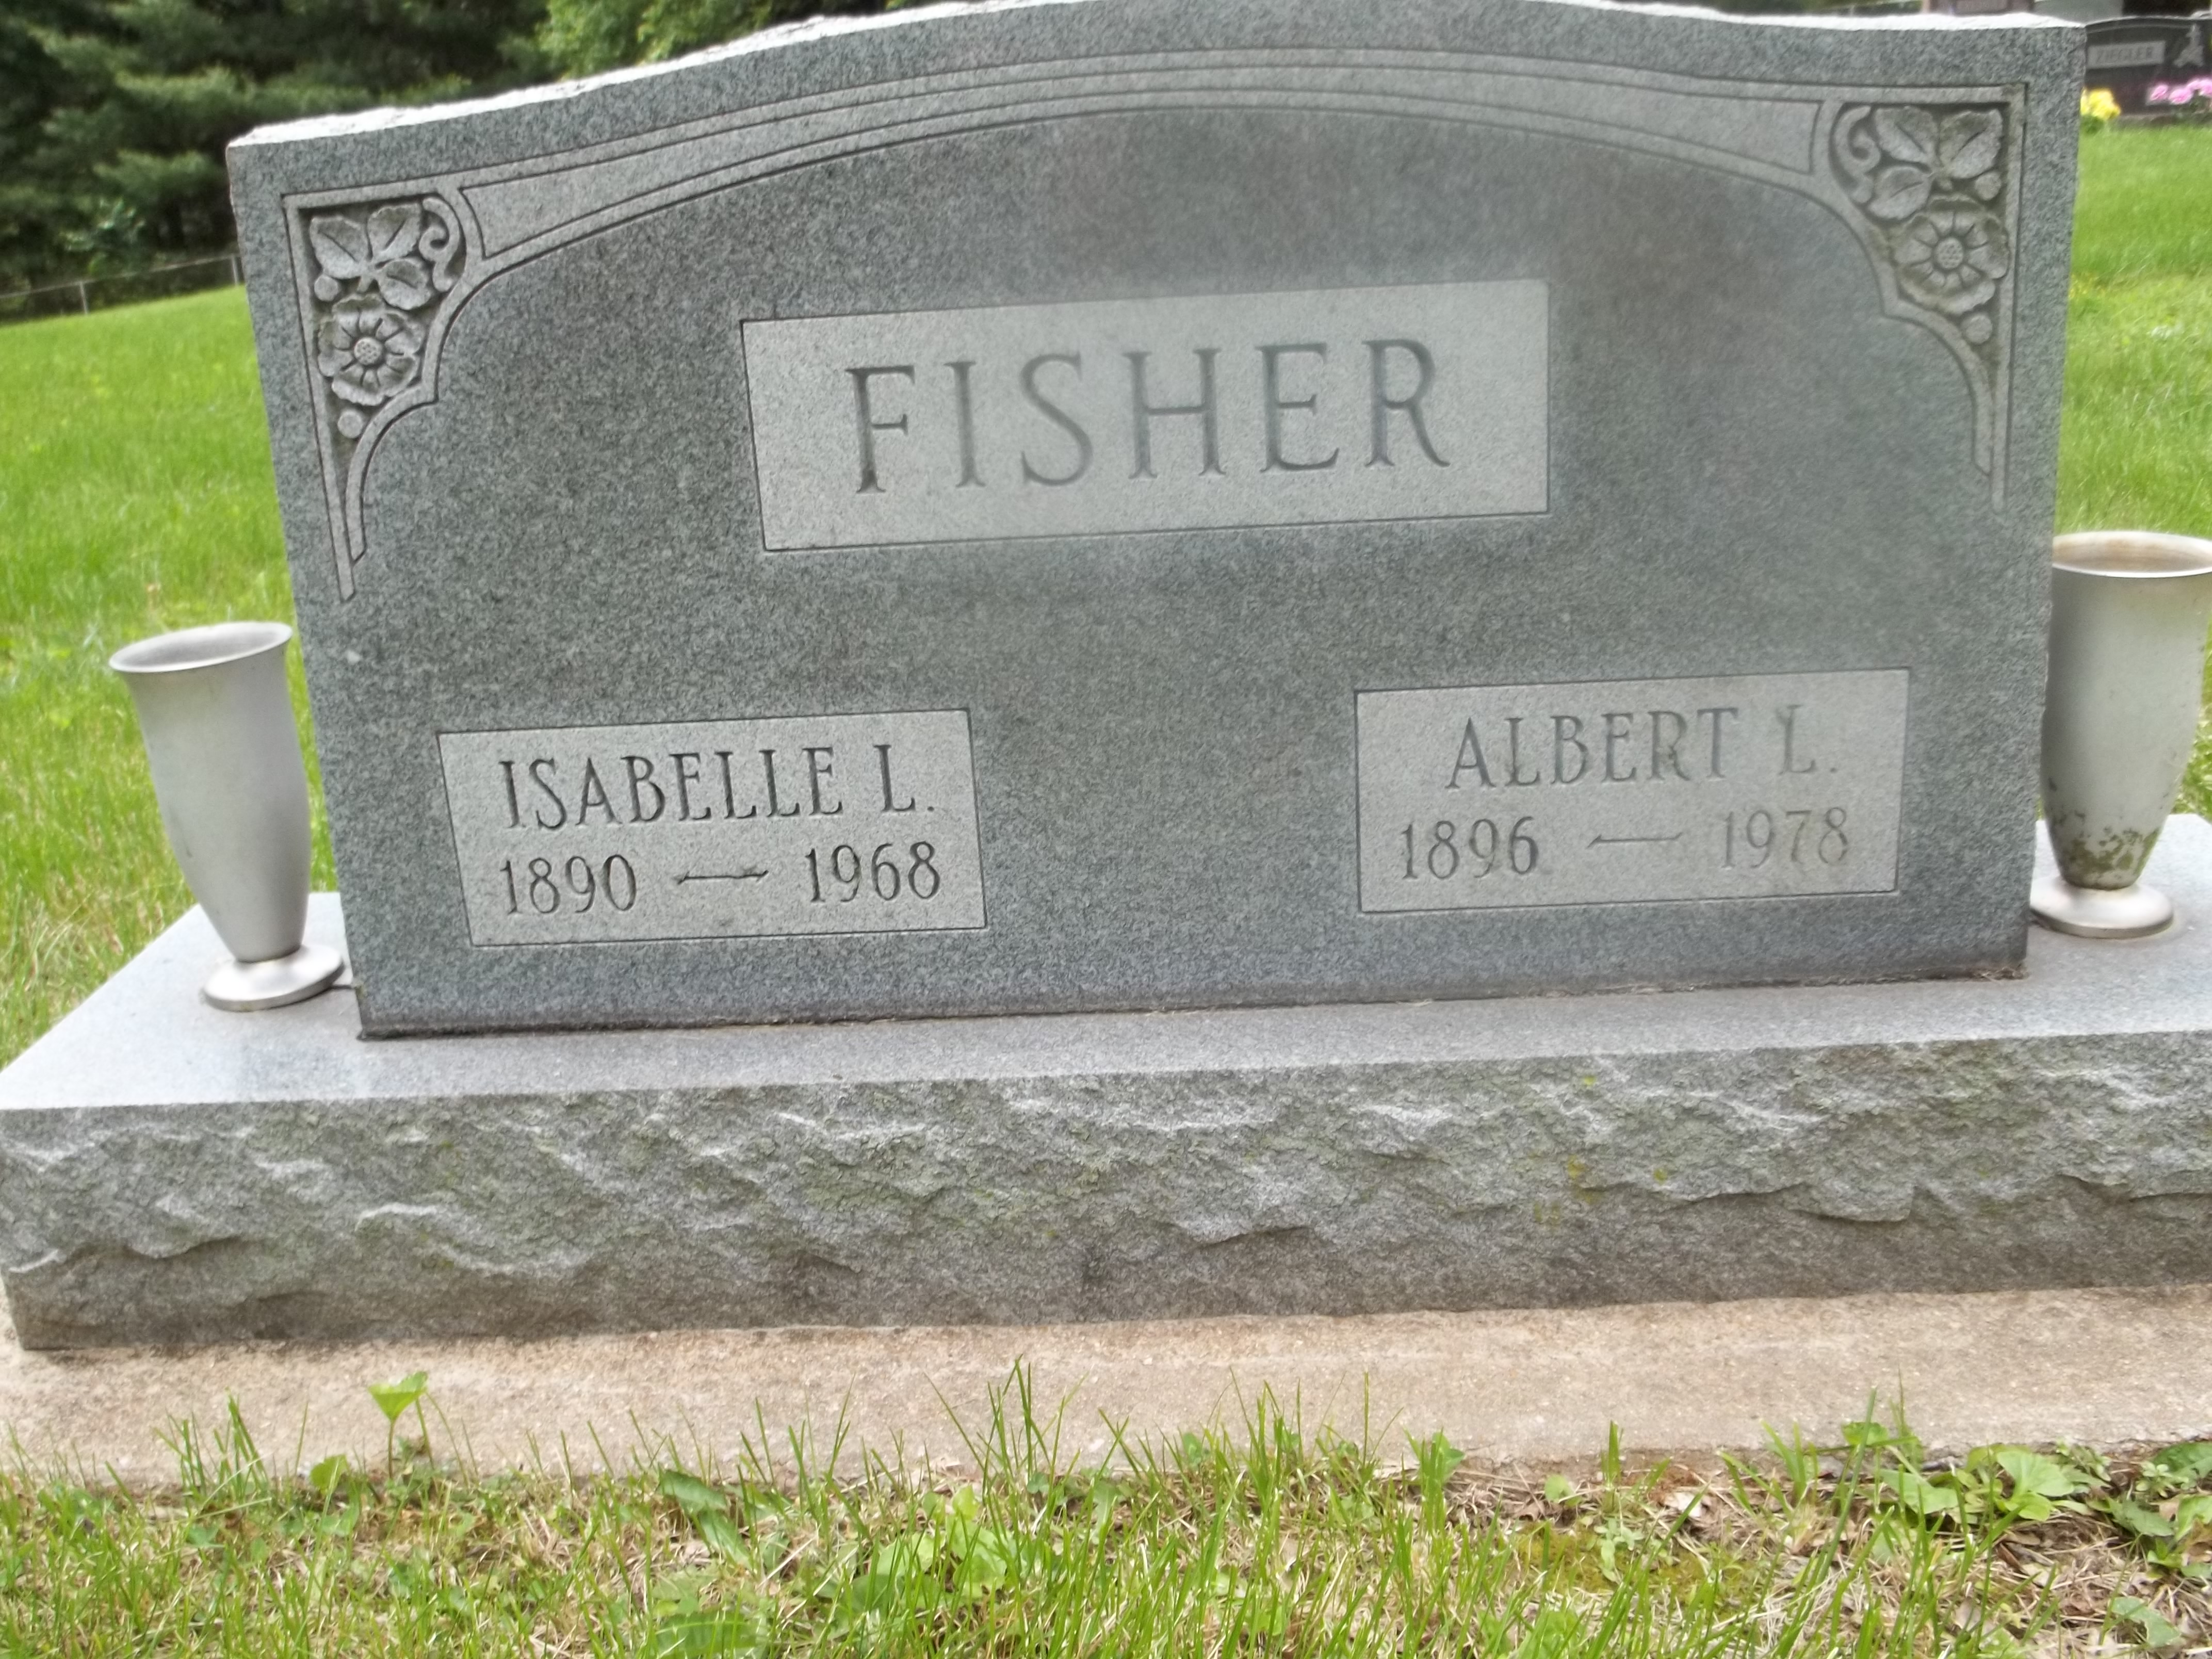 Albert L. and Isabelle L. Fisher Headstone